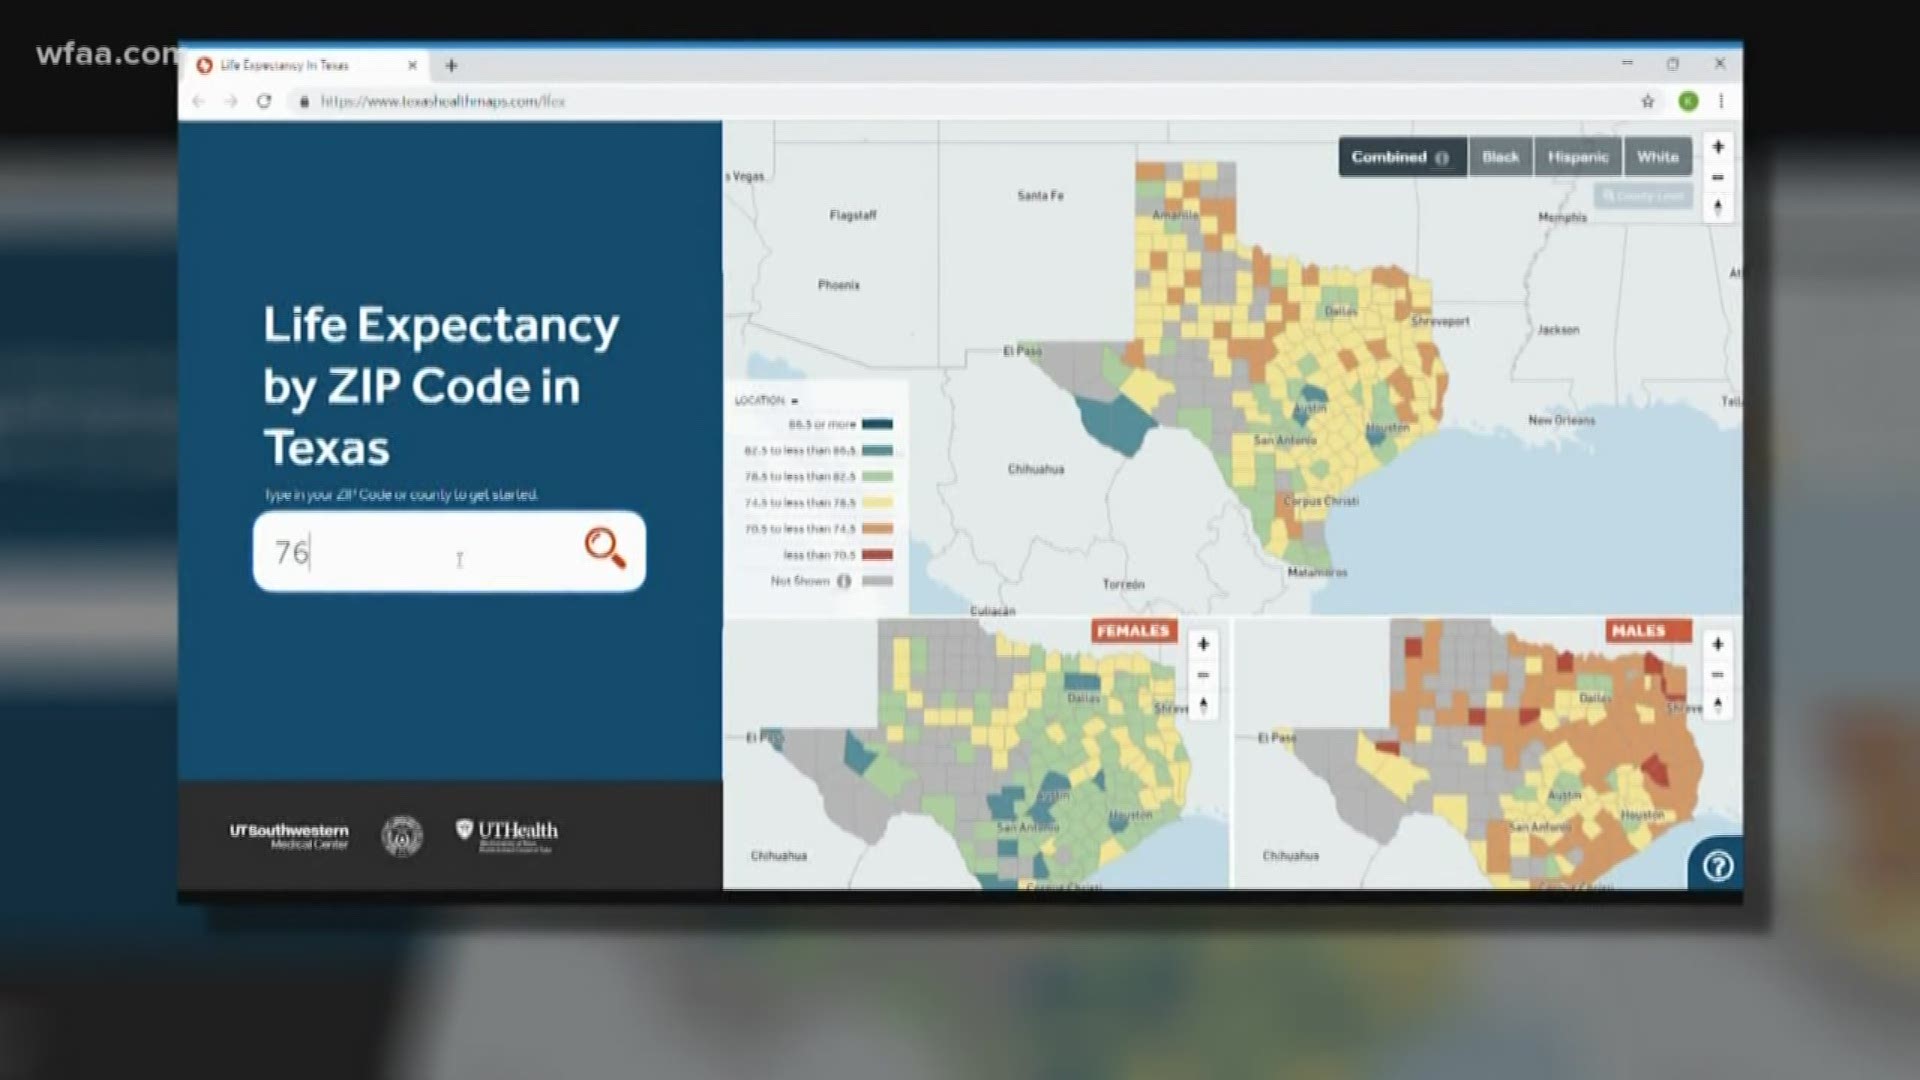 A UT Southwestern analysis of state health records and death statistics details life expectancy in Texas down to the ZIP code you live in.